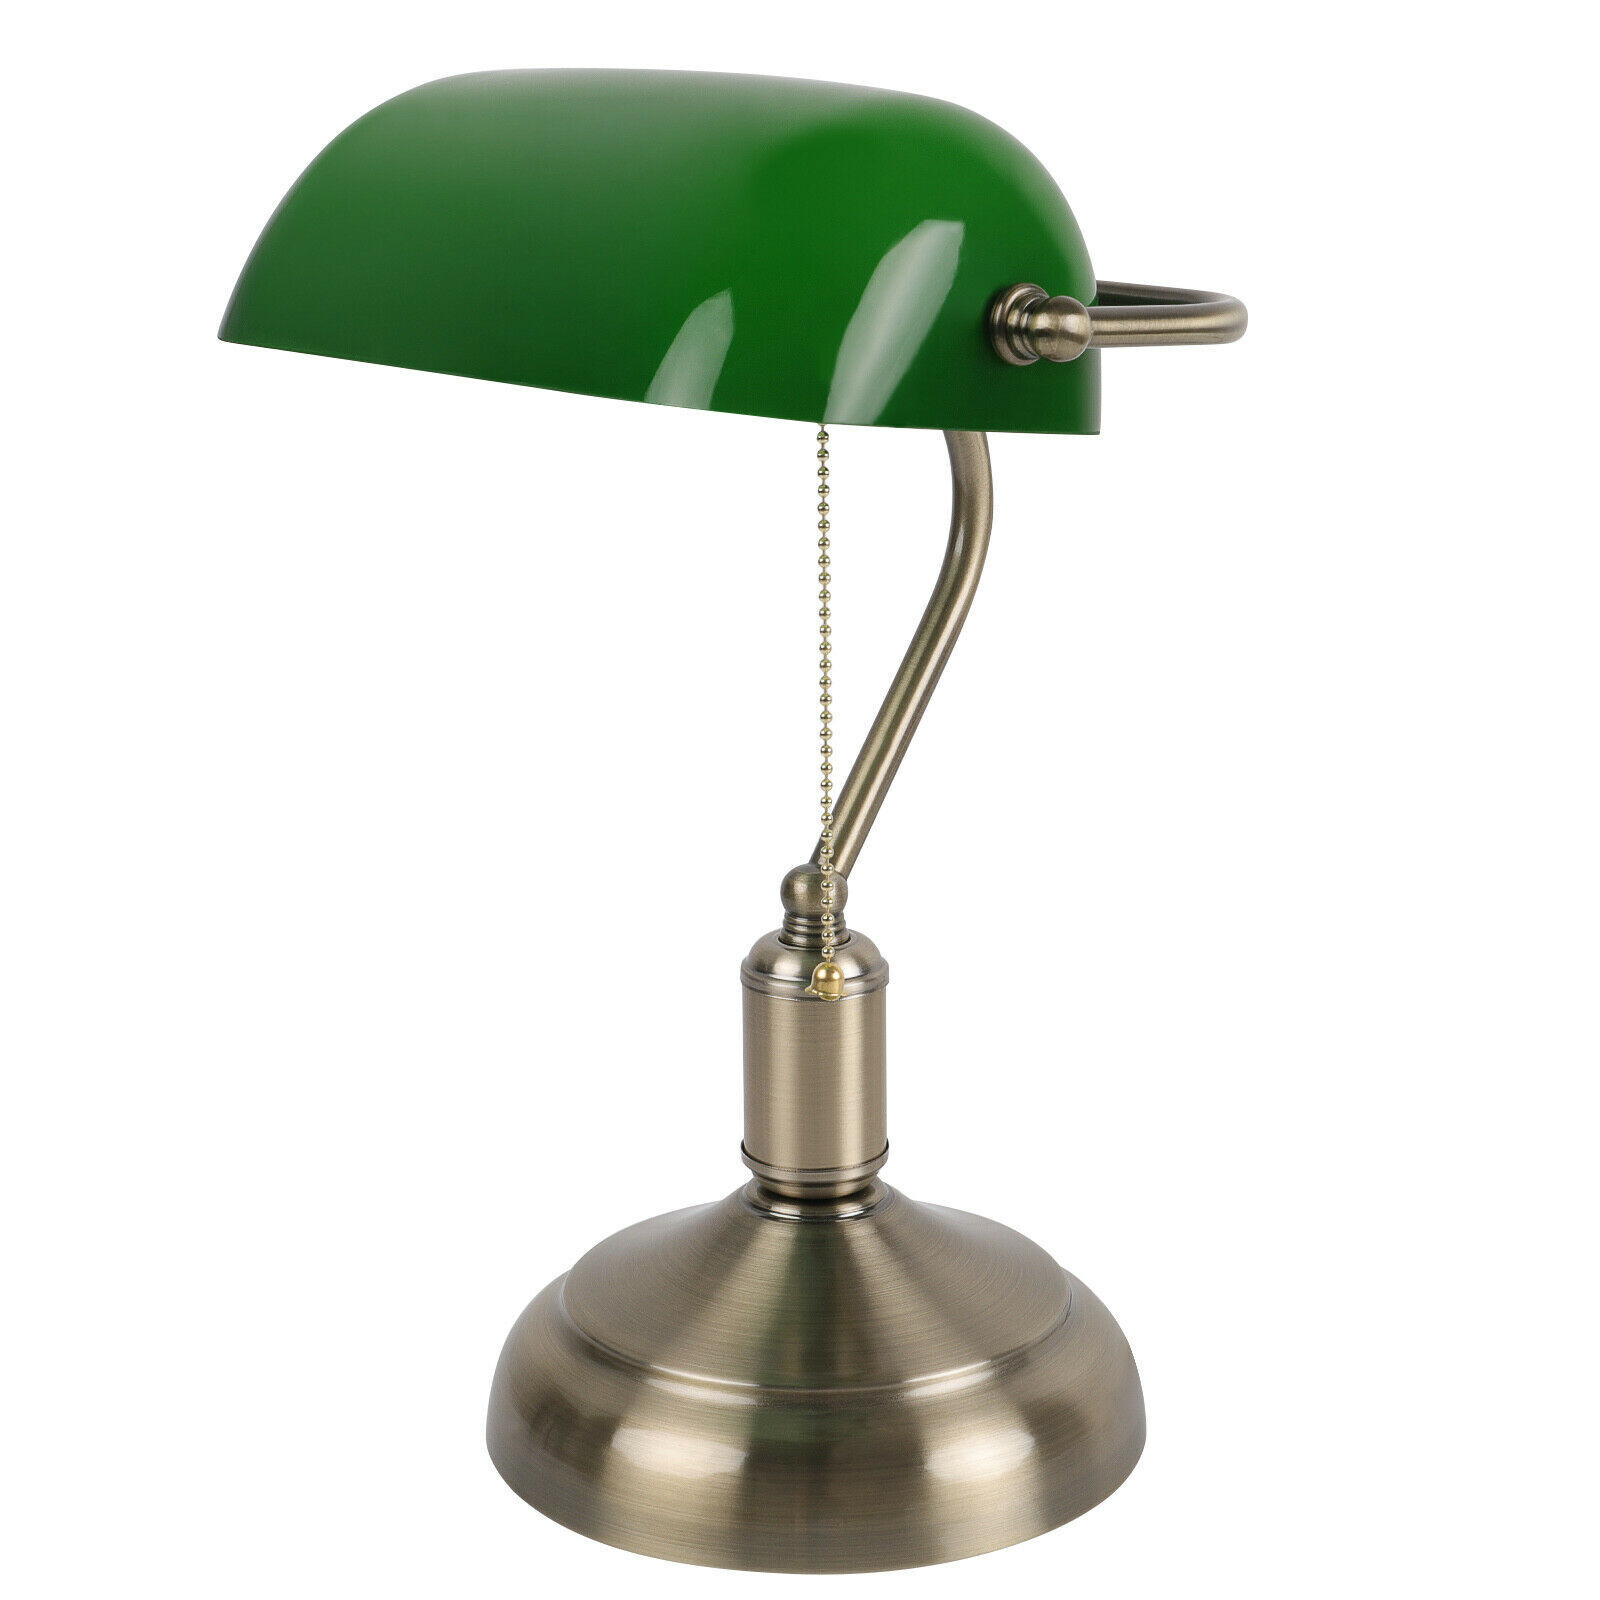 Vintage Bankers Lamp Light Desk bLibrary Piano Lamp Glass Shade Green/Black 15